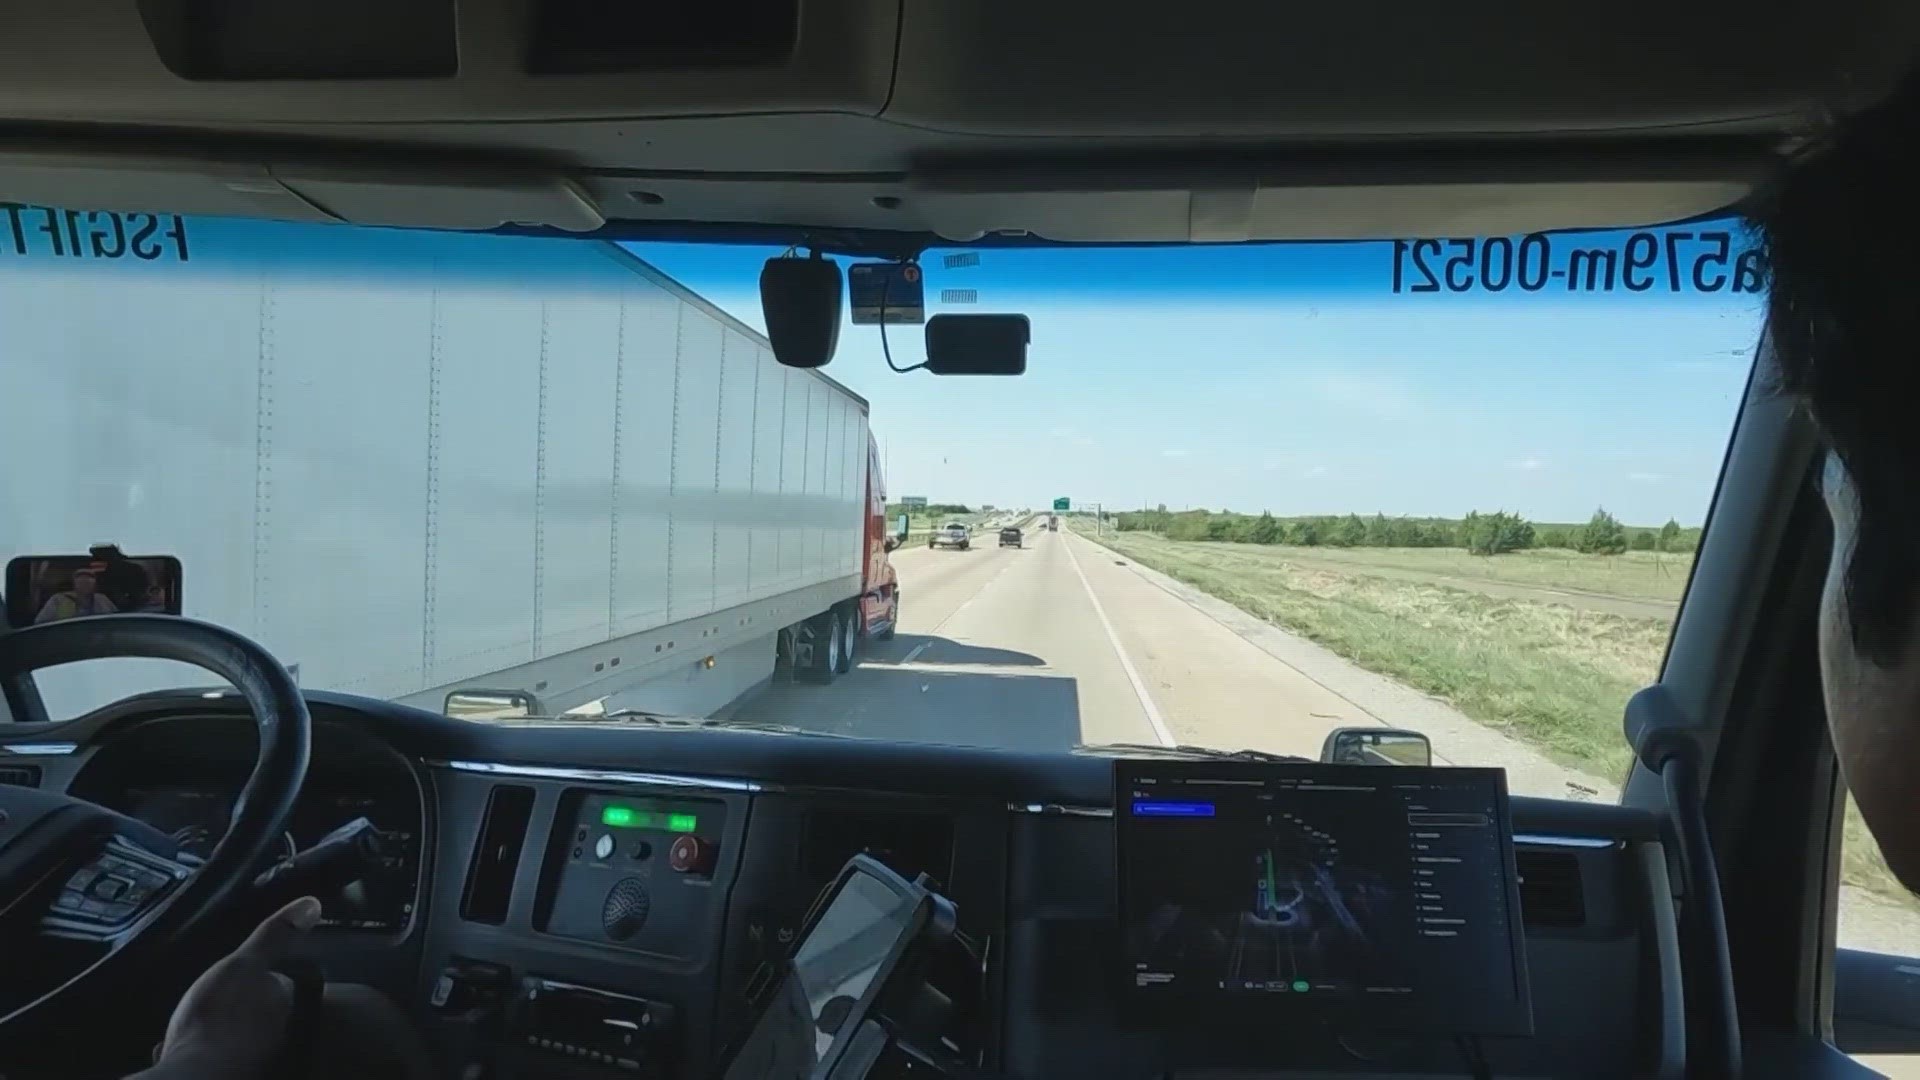 The truck's systems are learning what to do if a police officer needs it to pull over.